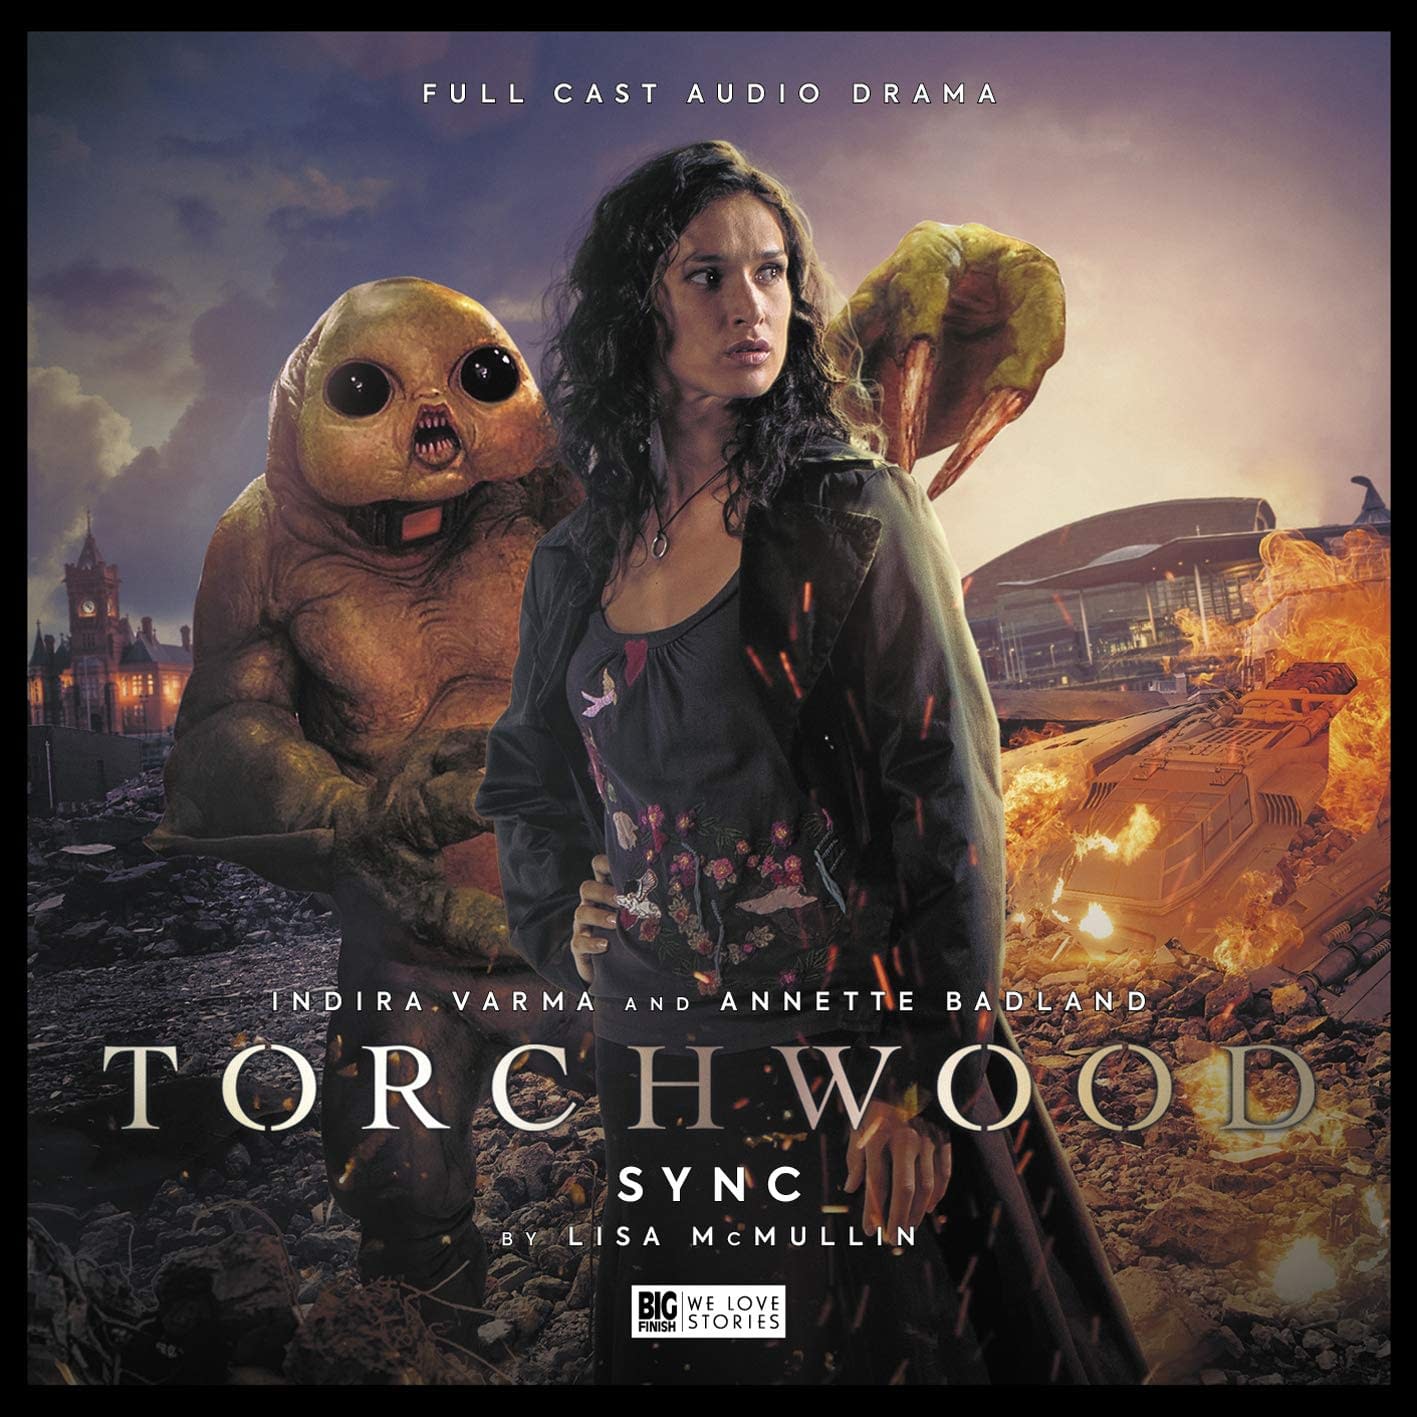 "Torchwood: Sync": Big Finish "Evil" Buddy Comedy a Fun Diversion That Doesn't Disappoint [REVIEW]